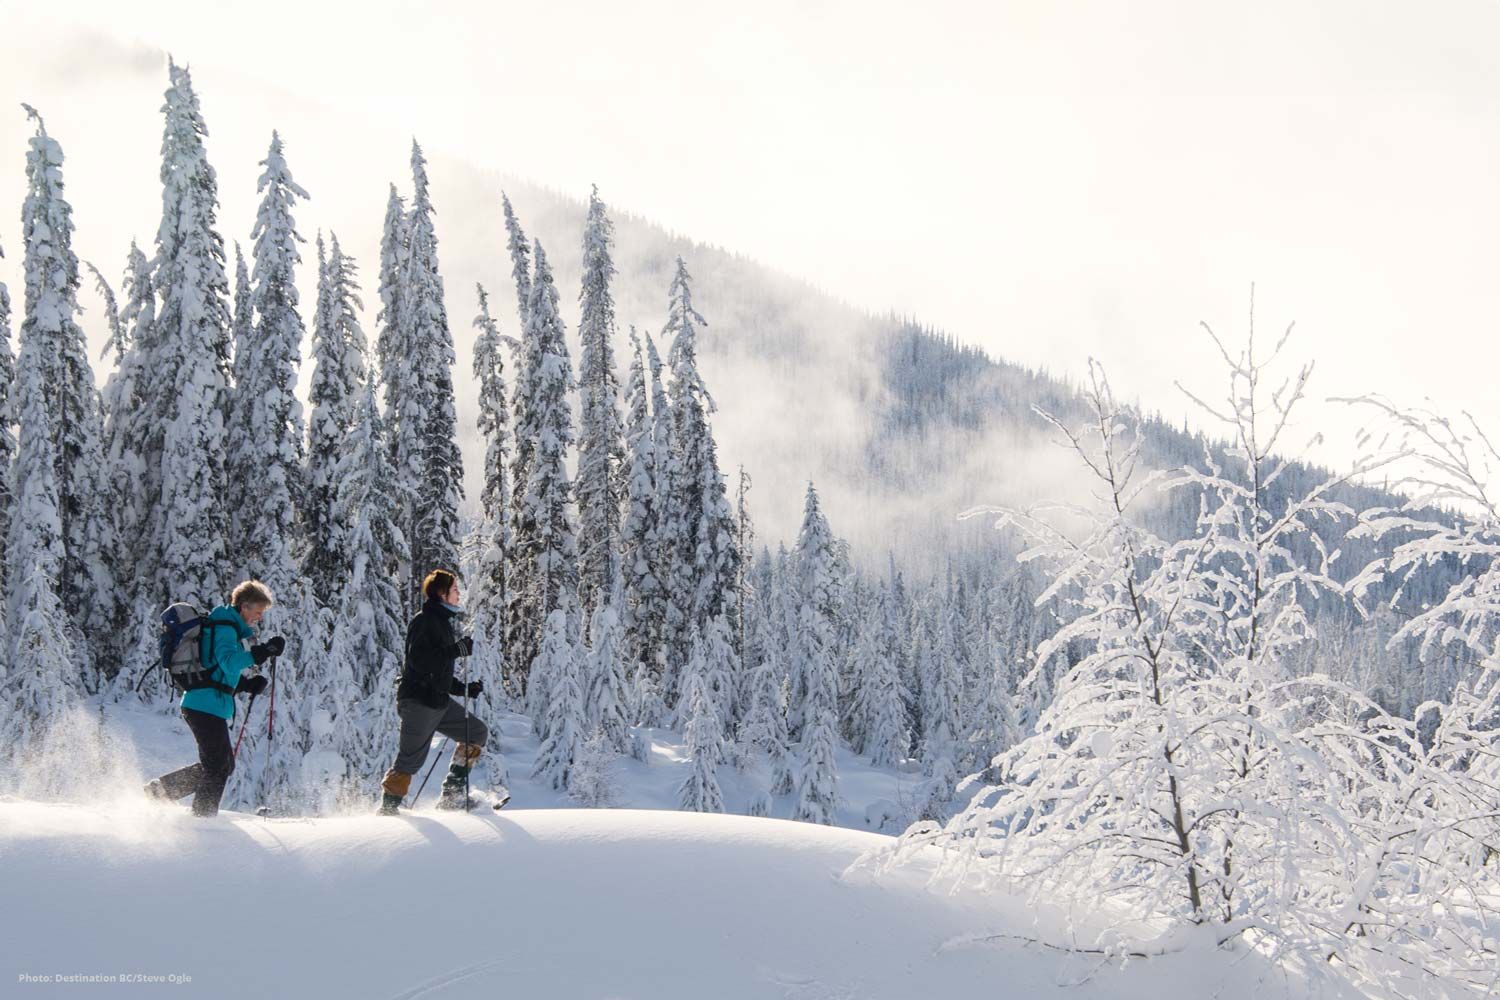 Get Outside - Guided Hiking, Backpacking & Snowshoeing